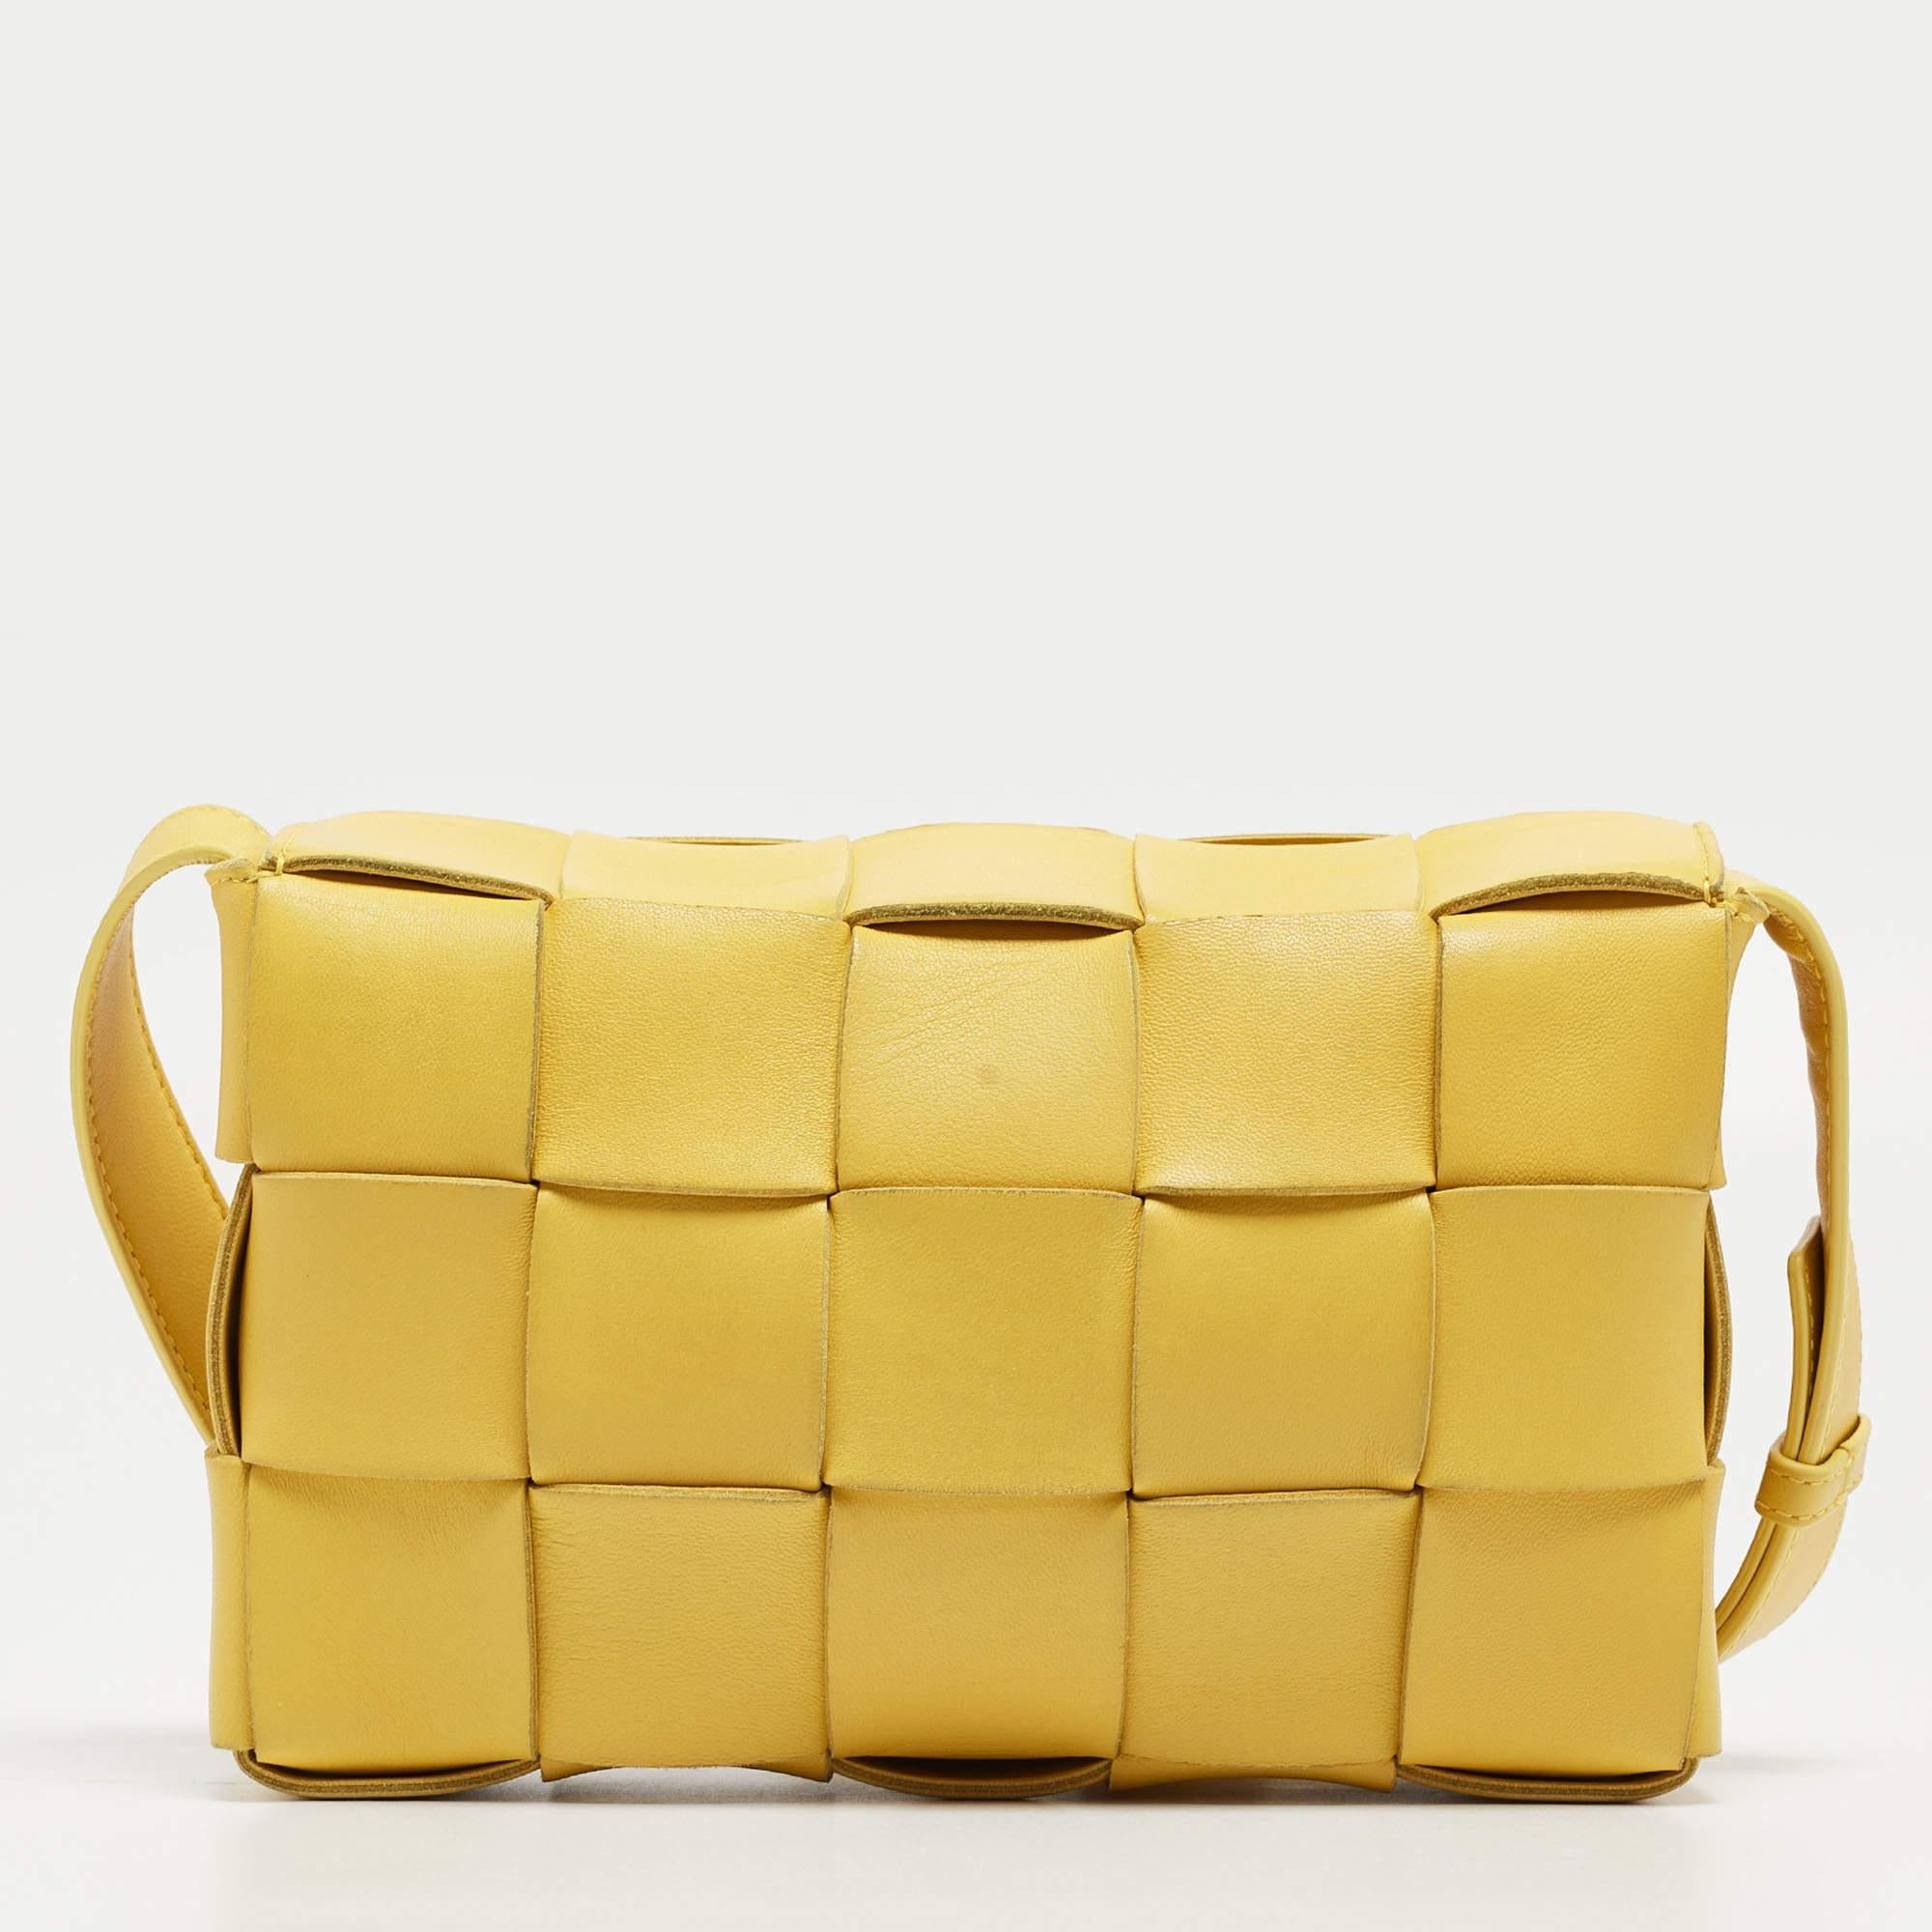 The Cassette bag by Bottega Veneta is all things stylish, trendy, and Instagram-able. With its playful take on the brand's signature house code - the Intrecciato weave, the bag's exterior flaunts a maxi version of the weave. It is crafted from